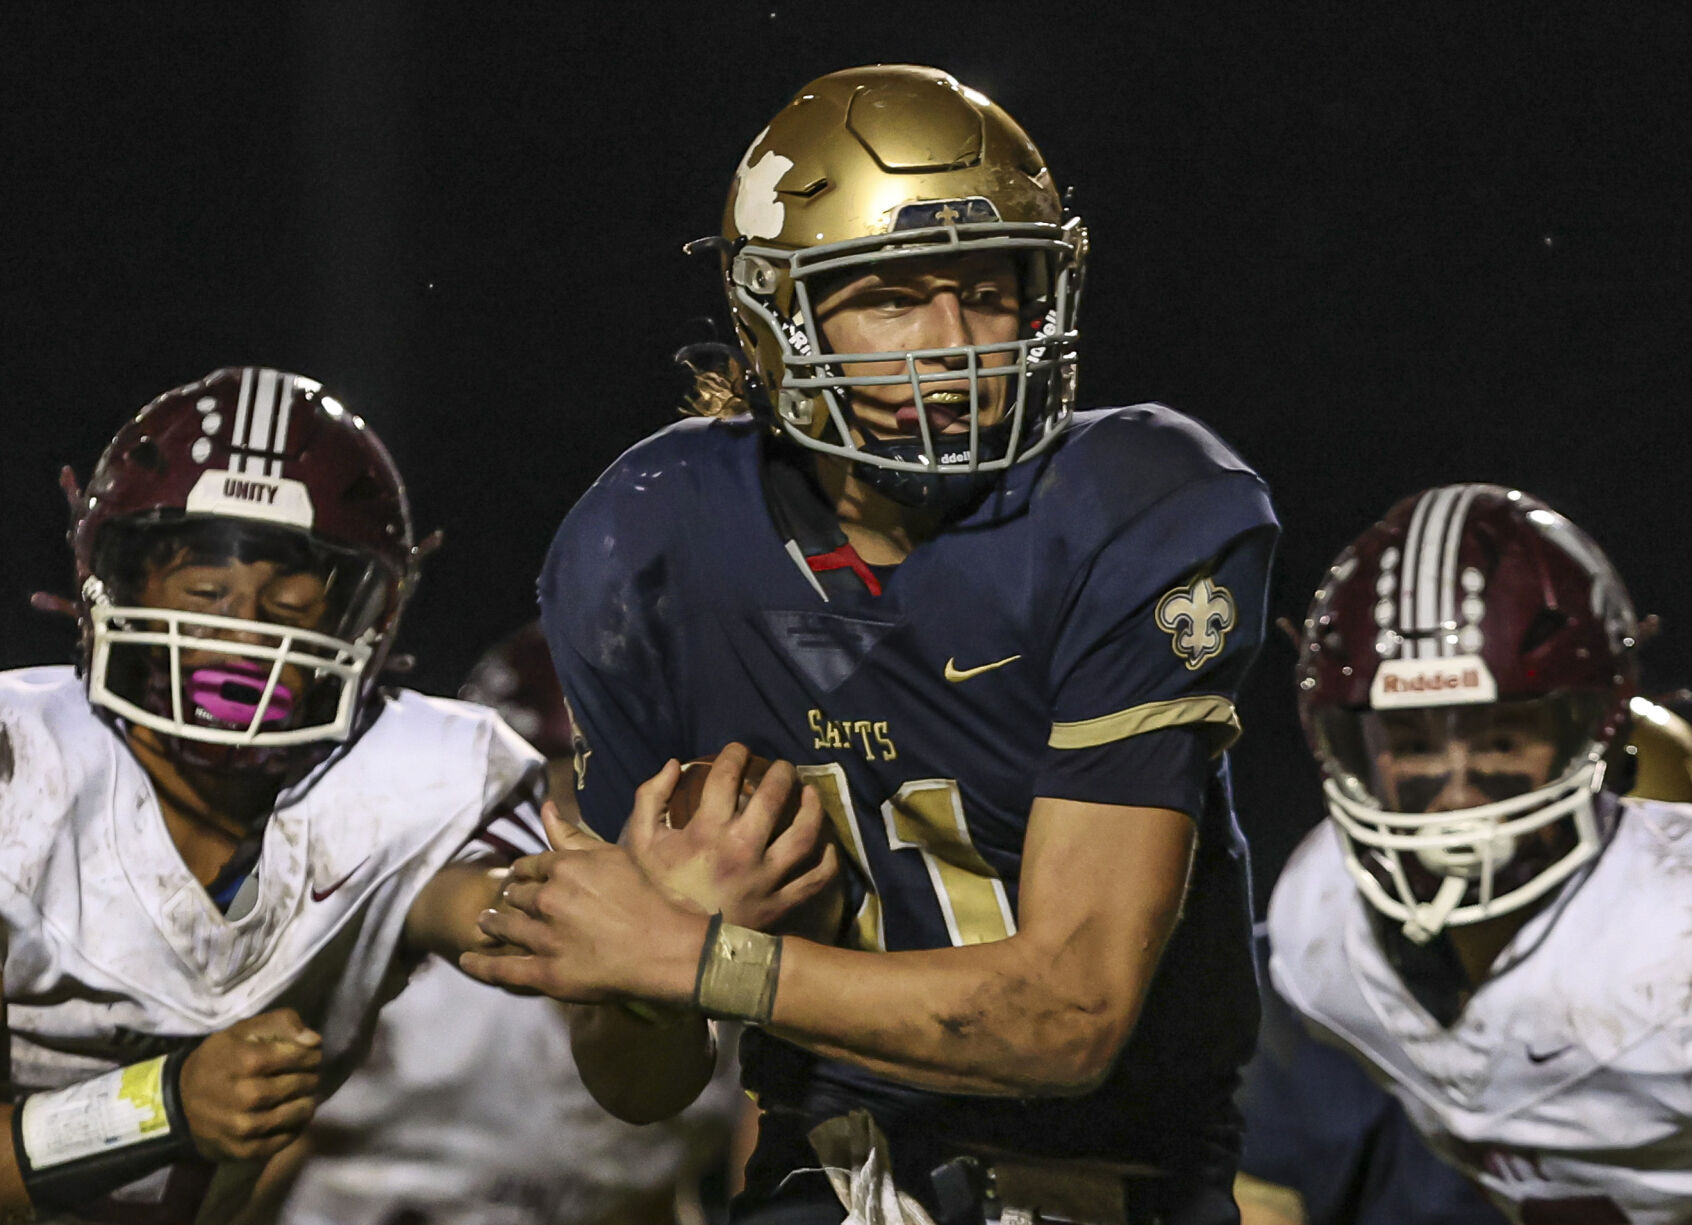 Central Catholic’s Colin Hayes dominates with 196 rushing yards and six touchdowns